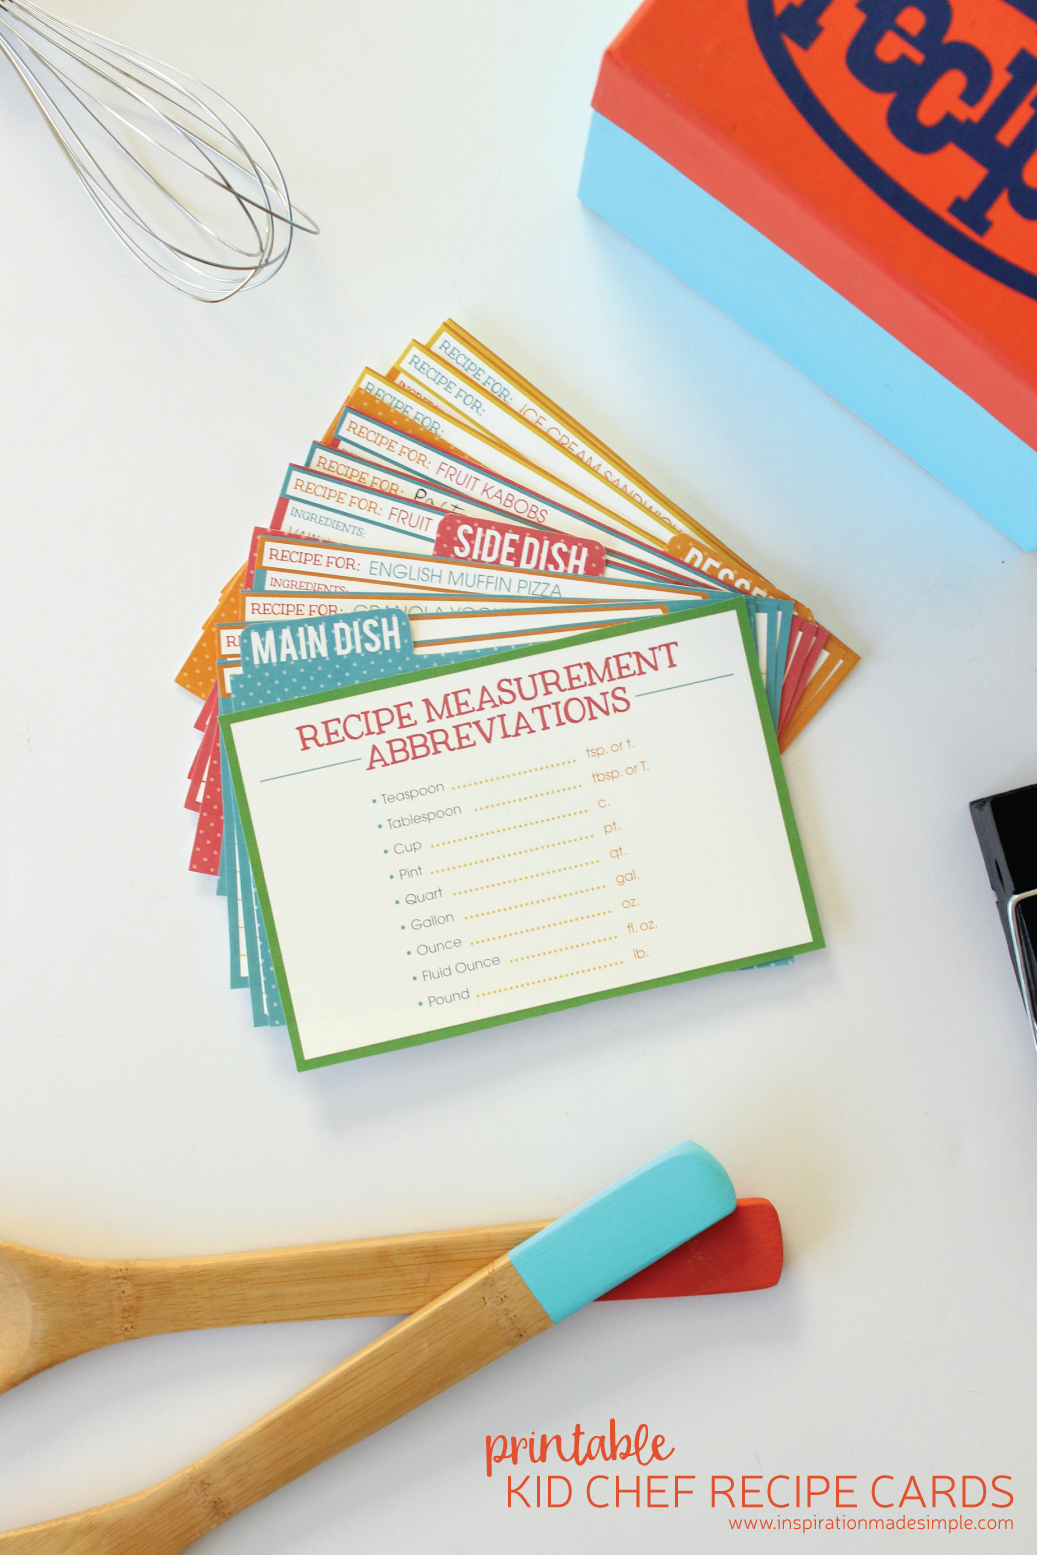 Printable recipe cards for kids including main dish, side dish, and dessert cards, category dividers and a measurement abbreviation cheat sheet